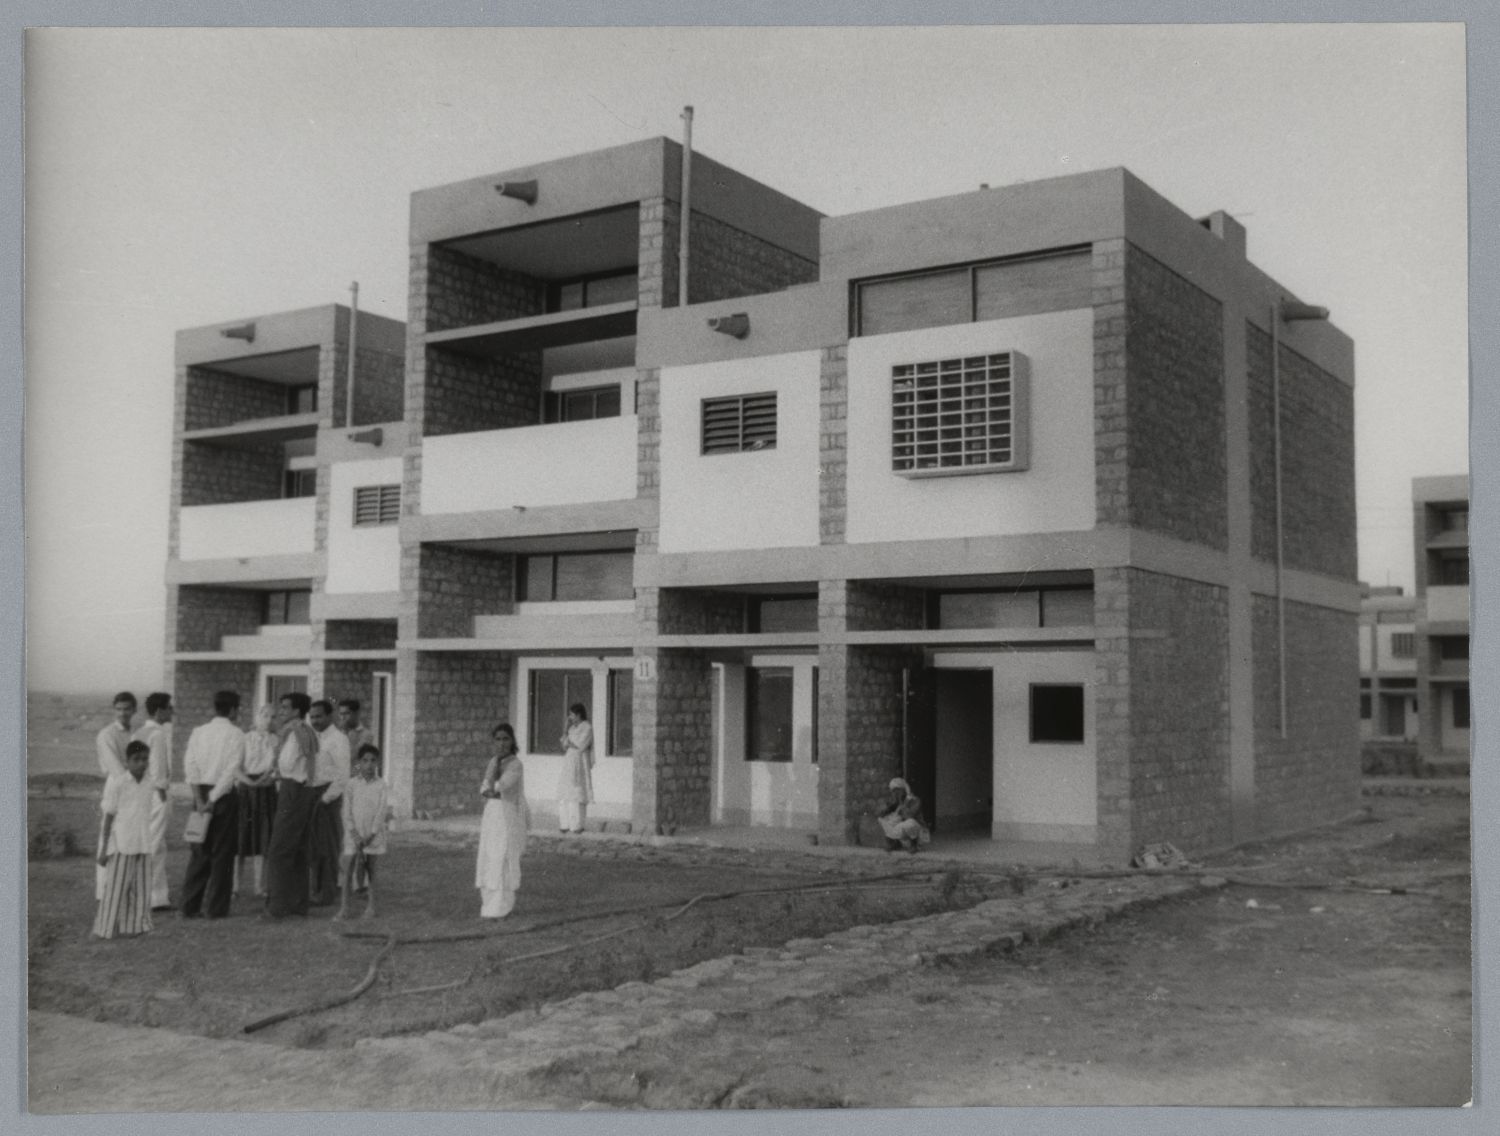 <p>Faculty housing: view of buildings under construction.</p>